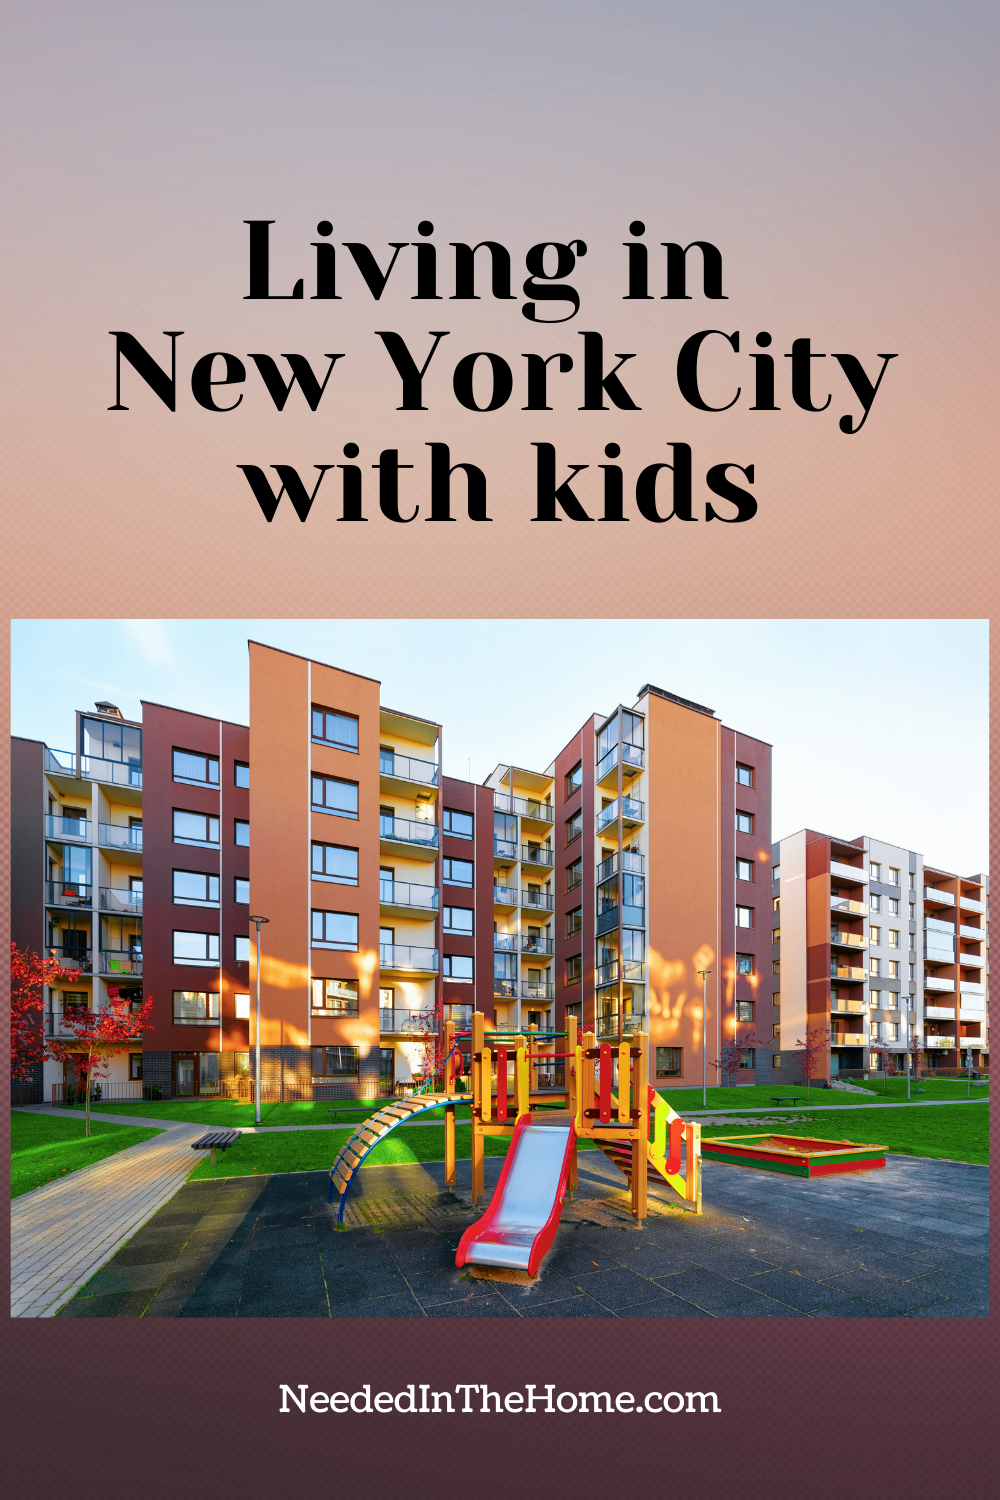 pinterest-pin-description ground level photo of NYC apartments behind playground that makes you think about what is it like to live in New York City with kids wording living in new york city with kids by neededinthehome